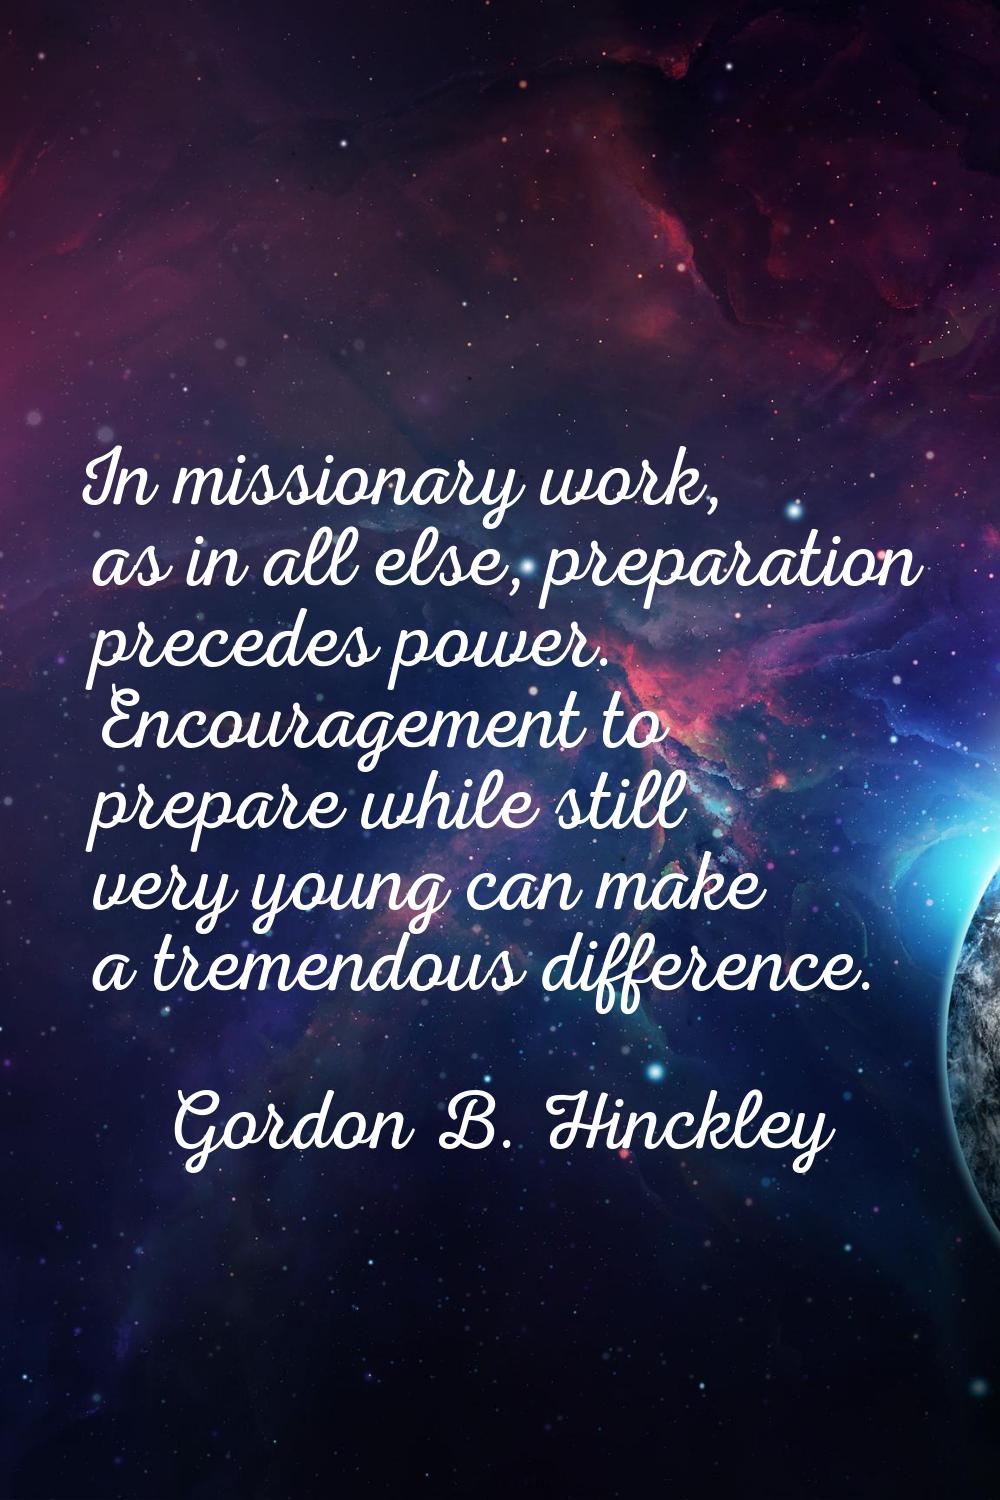 In missionary work, as in all else, preparation precedes power. Encouragement to prepare while stil